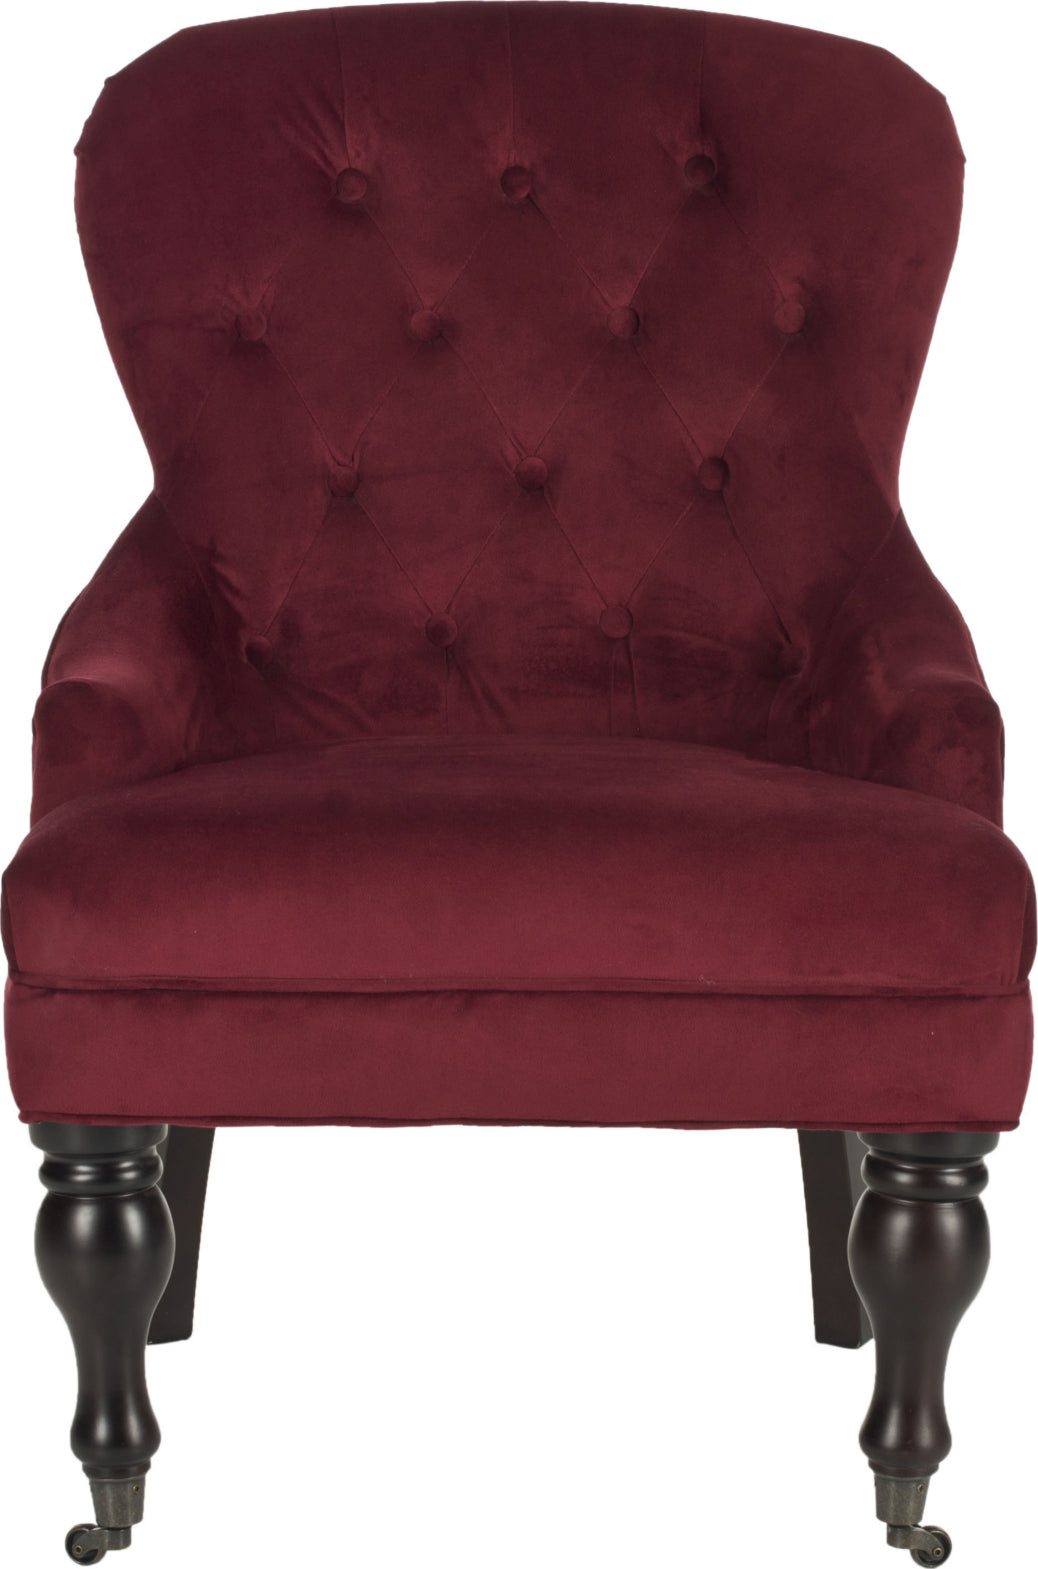 Safavieh Falcon Tufted Arm Chair Red Velvet and Java Furniture main image